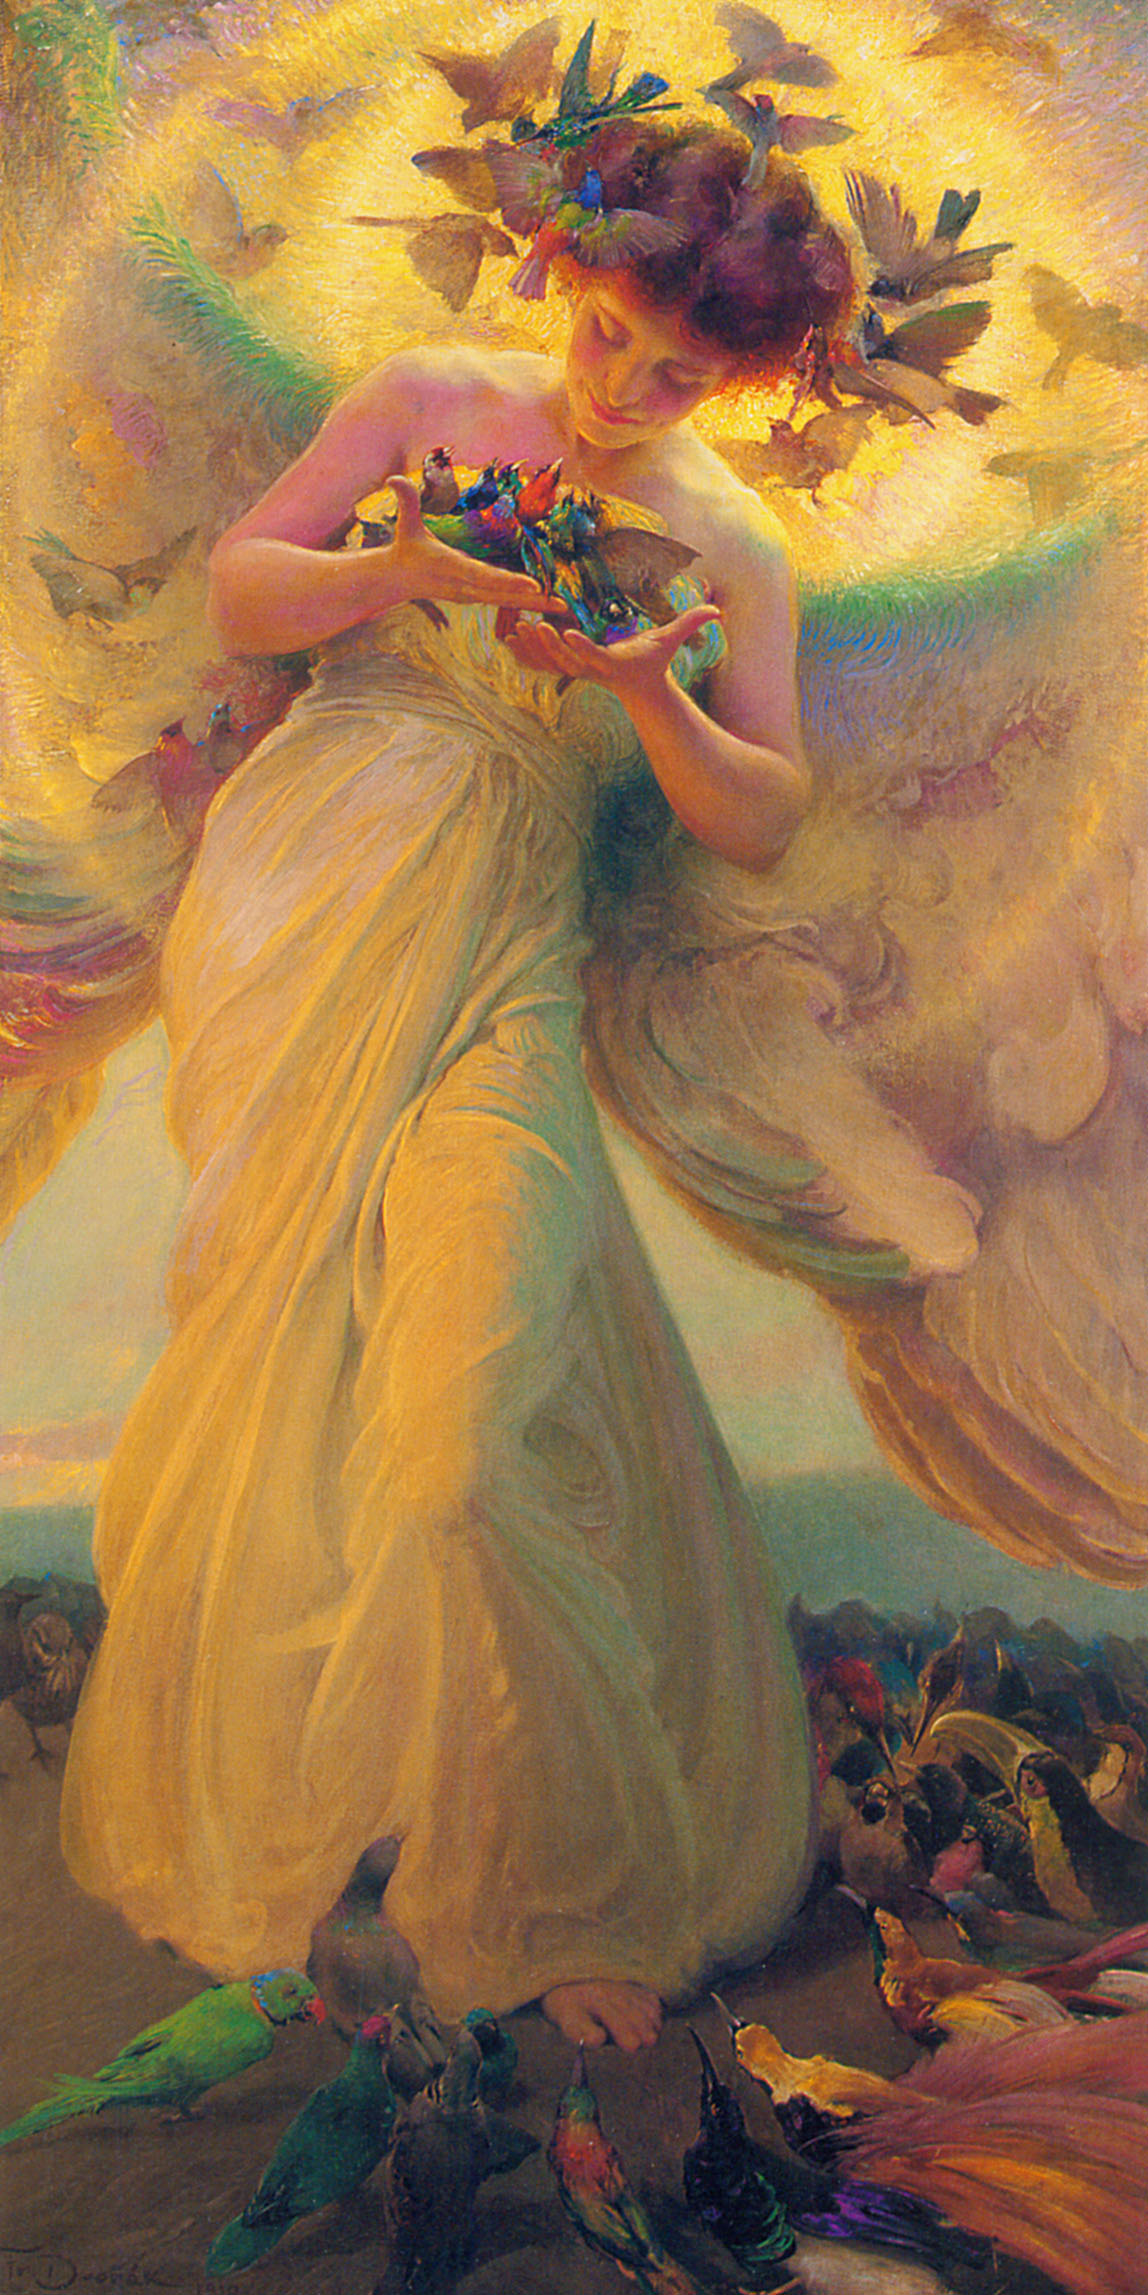 A glowing angel holds birds while birds surround her halo and feet.